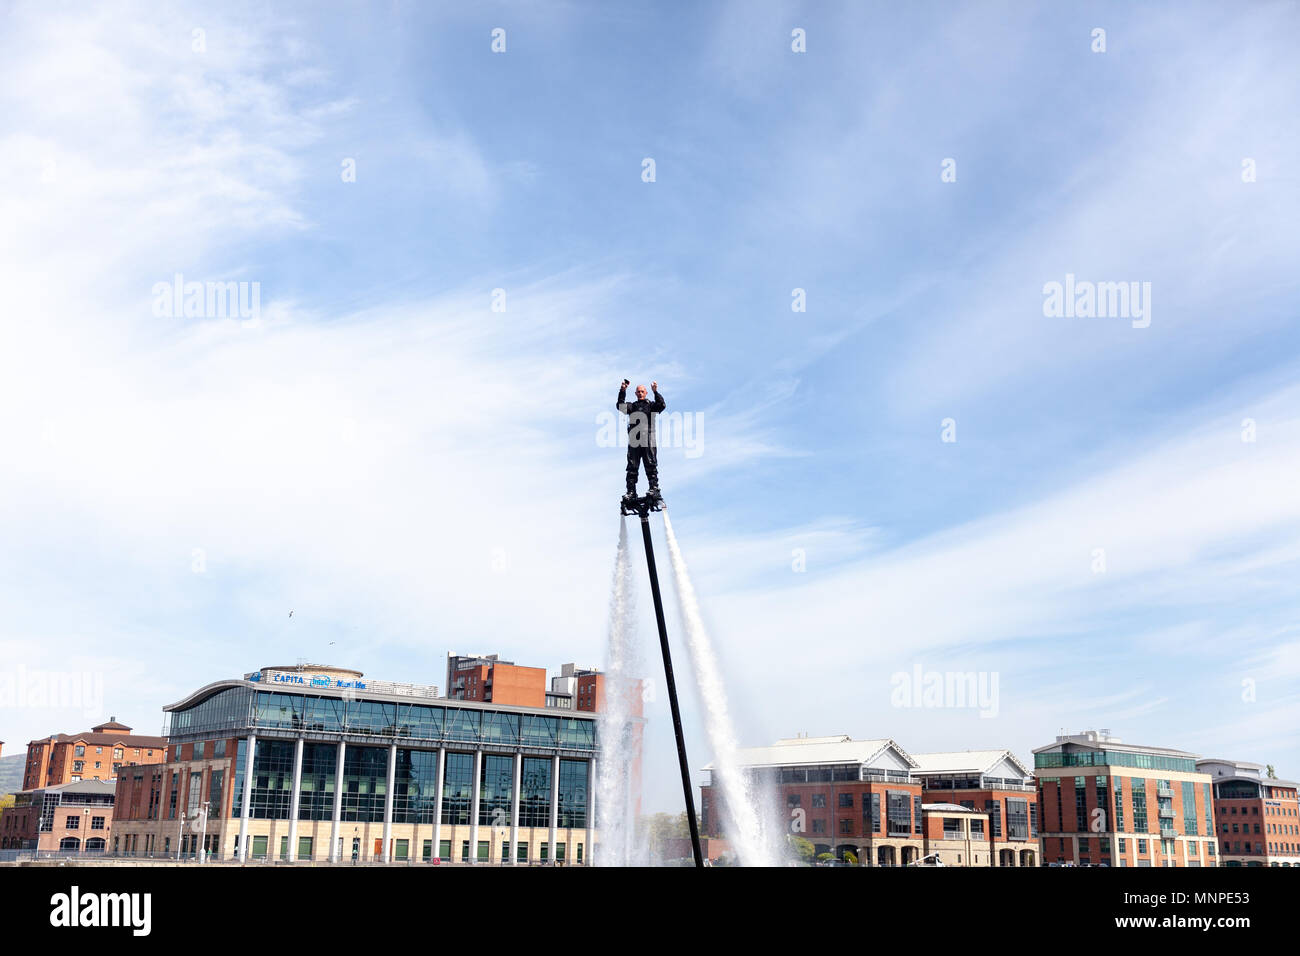 Queen's Quay, Northern Ireland.19th May 2018. As part of the Belfast Maritime Festival there was flyboard jet ski display.  Photo: Sean Harkin/Alamy Live News sales@alamy.com Stock Photo